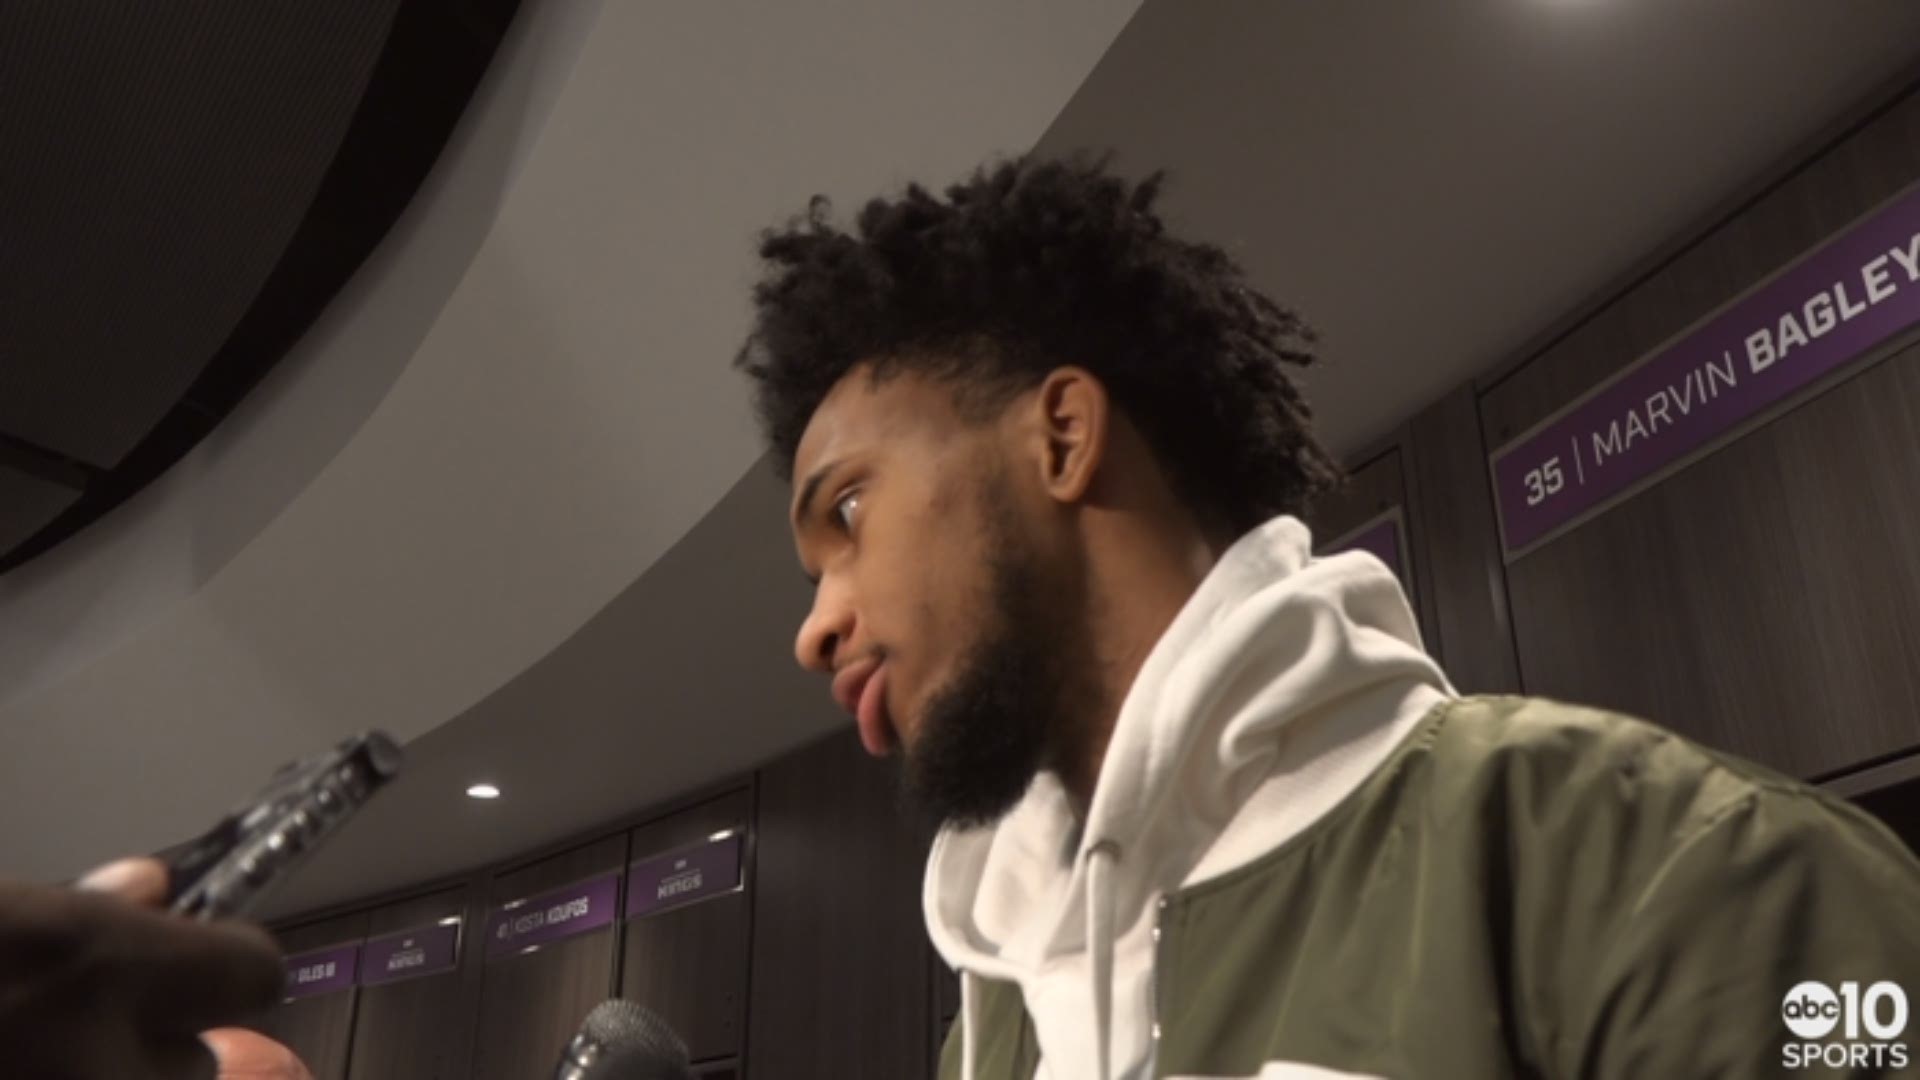 Kings rookie Marvin Bagley III talks about Saturday night's loss in Sacramento to the Los Angeles Lakers, playing against LeBron James for the first time in an NBA game, De'Aaron Fox's hot hand in the second quarter and the mistakes made by his team in the defeat.